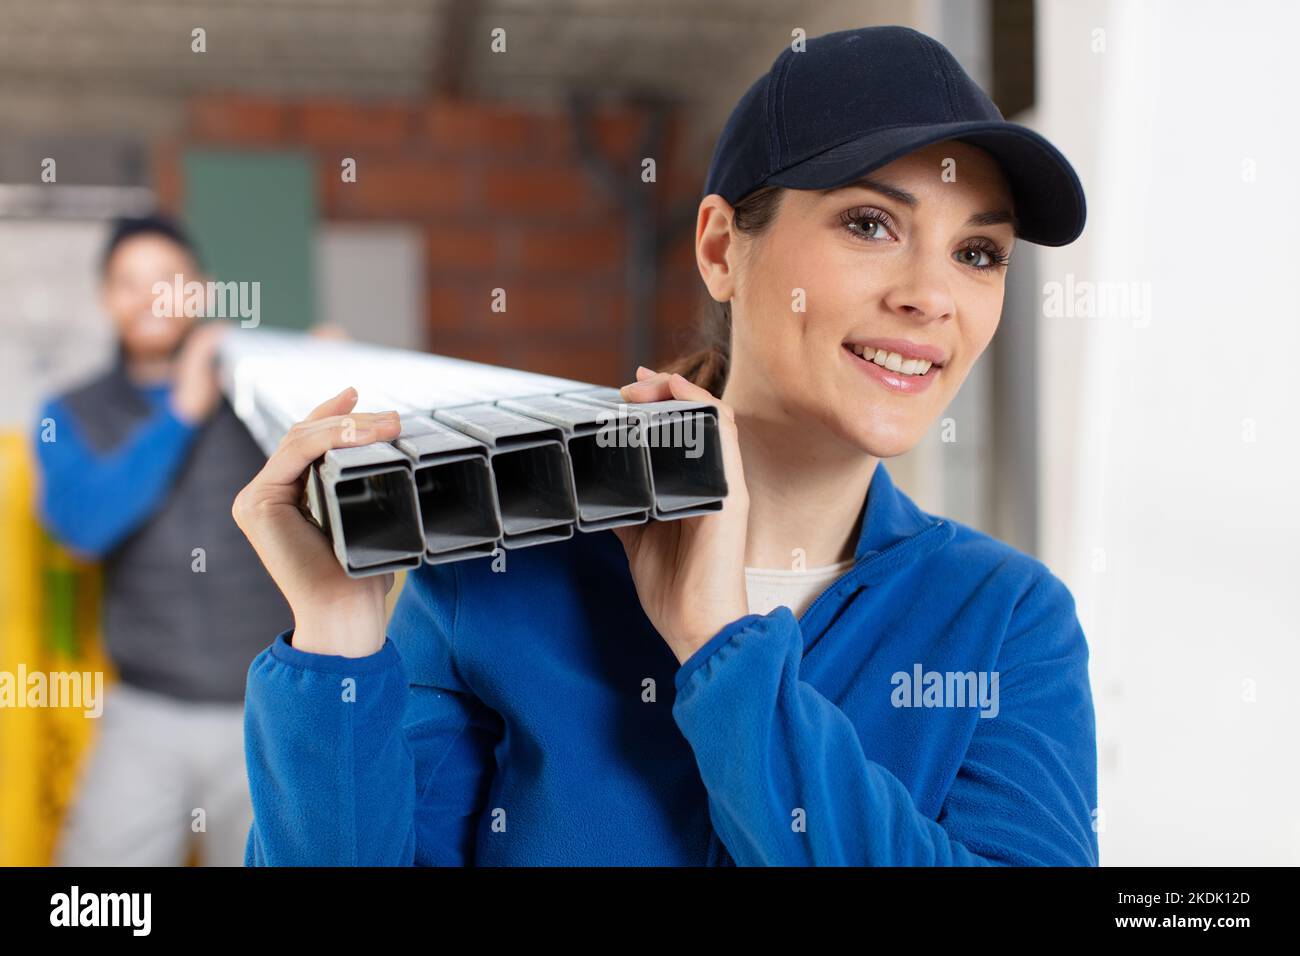 female builder looking at camera Stock Photo